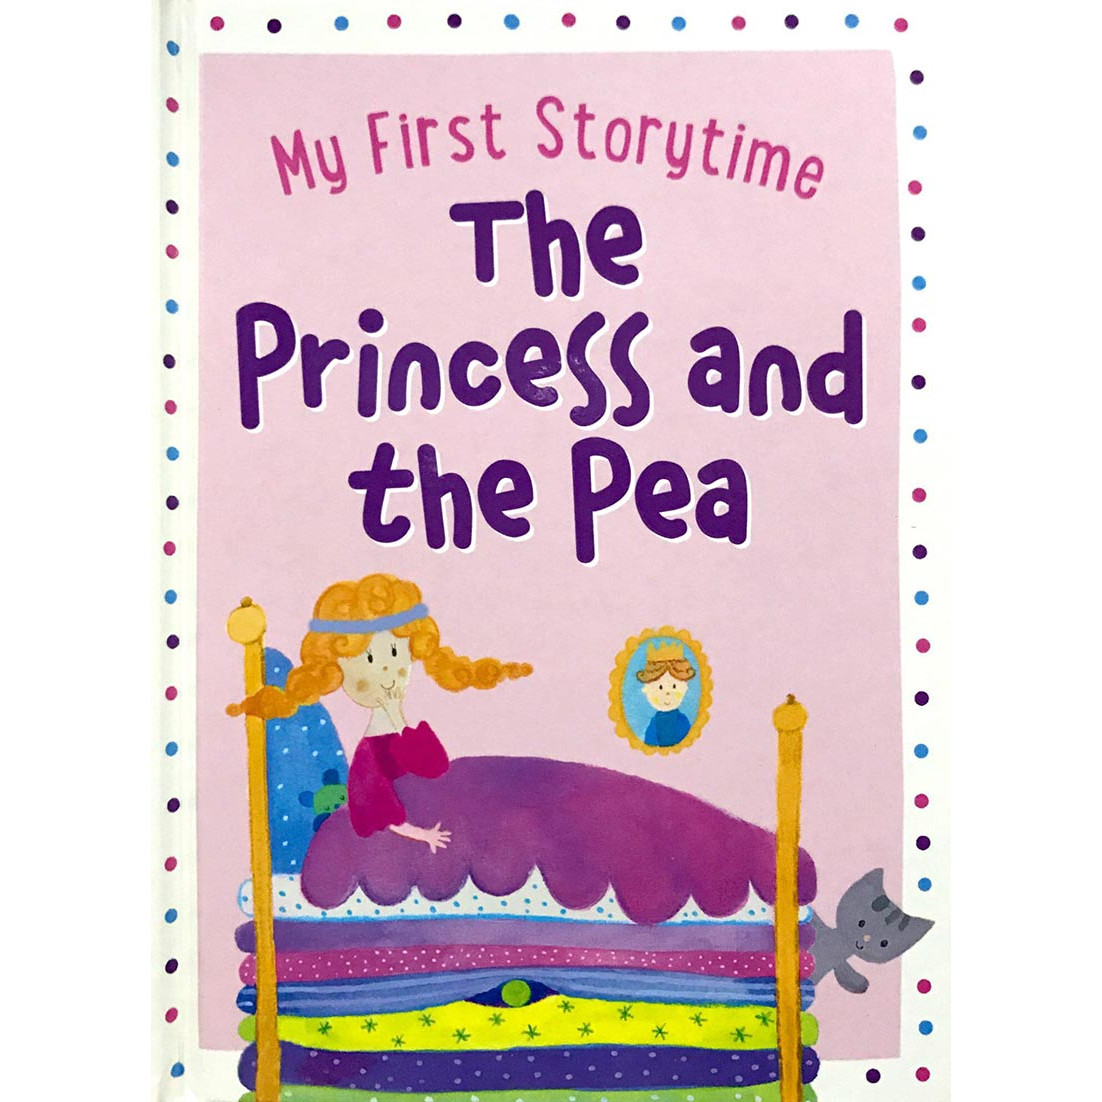 My First Storytime: Princess and the Pea